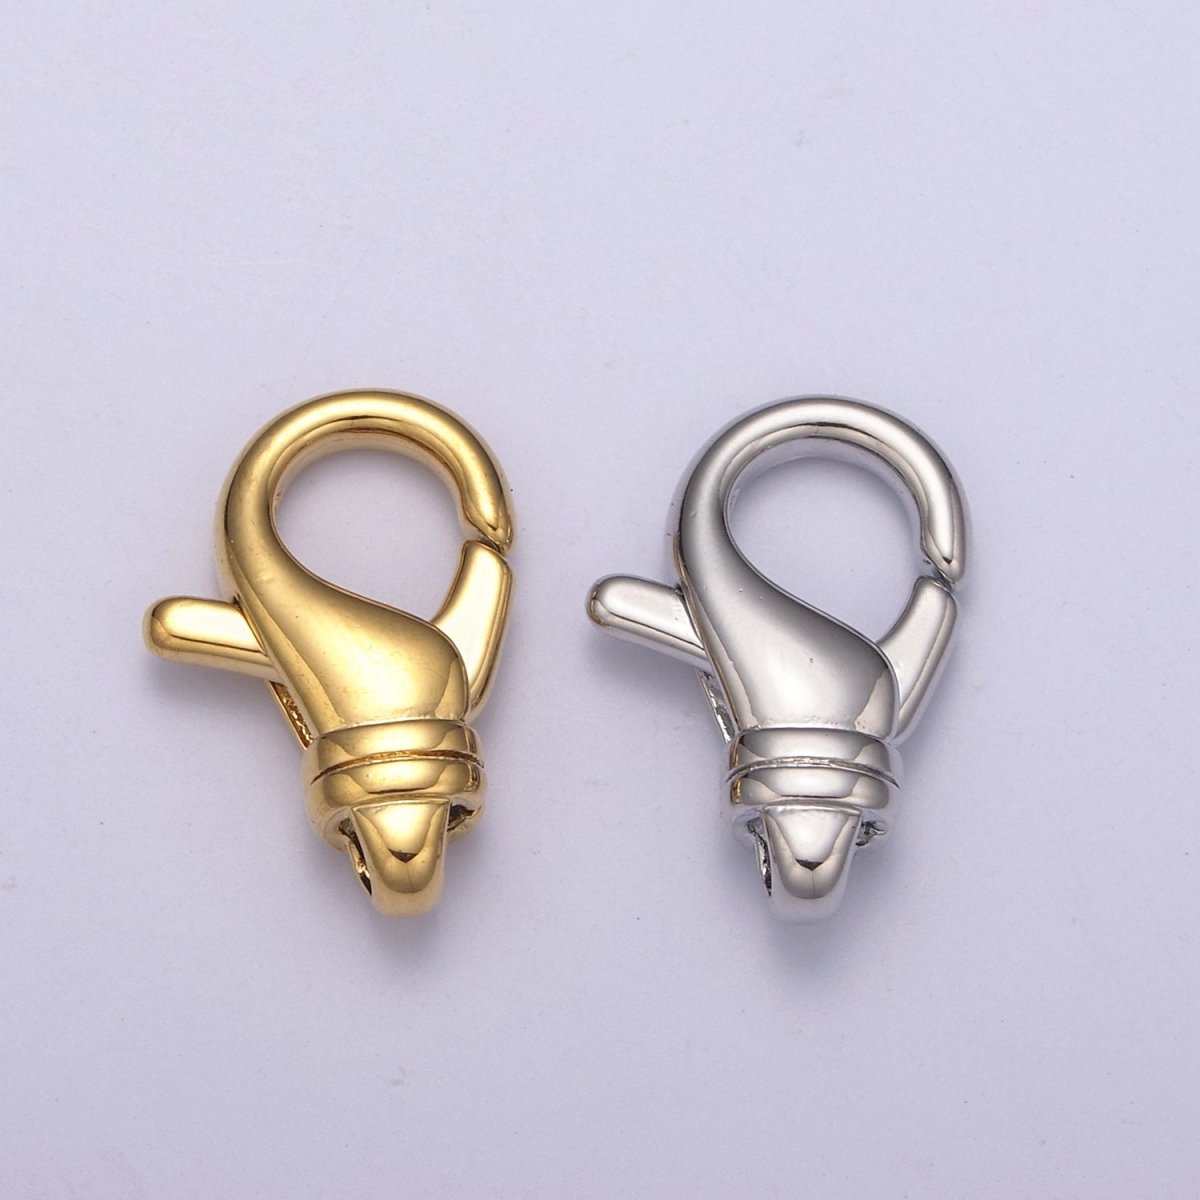 Silver / Gold Lobster Clasps - Teardrop 24K Gold Filled Clasp for Jewelry Making Findings L-588 L-589 - DLUXCA